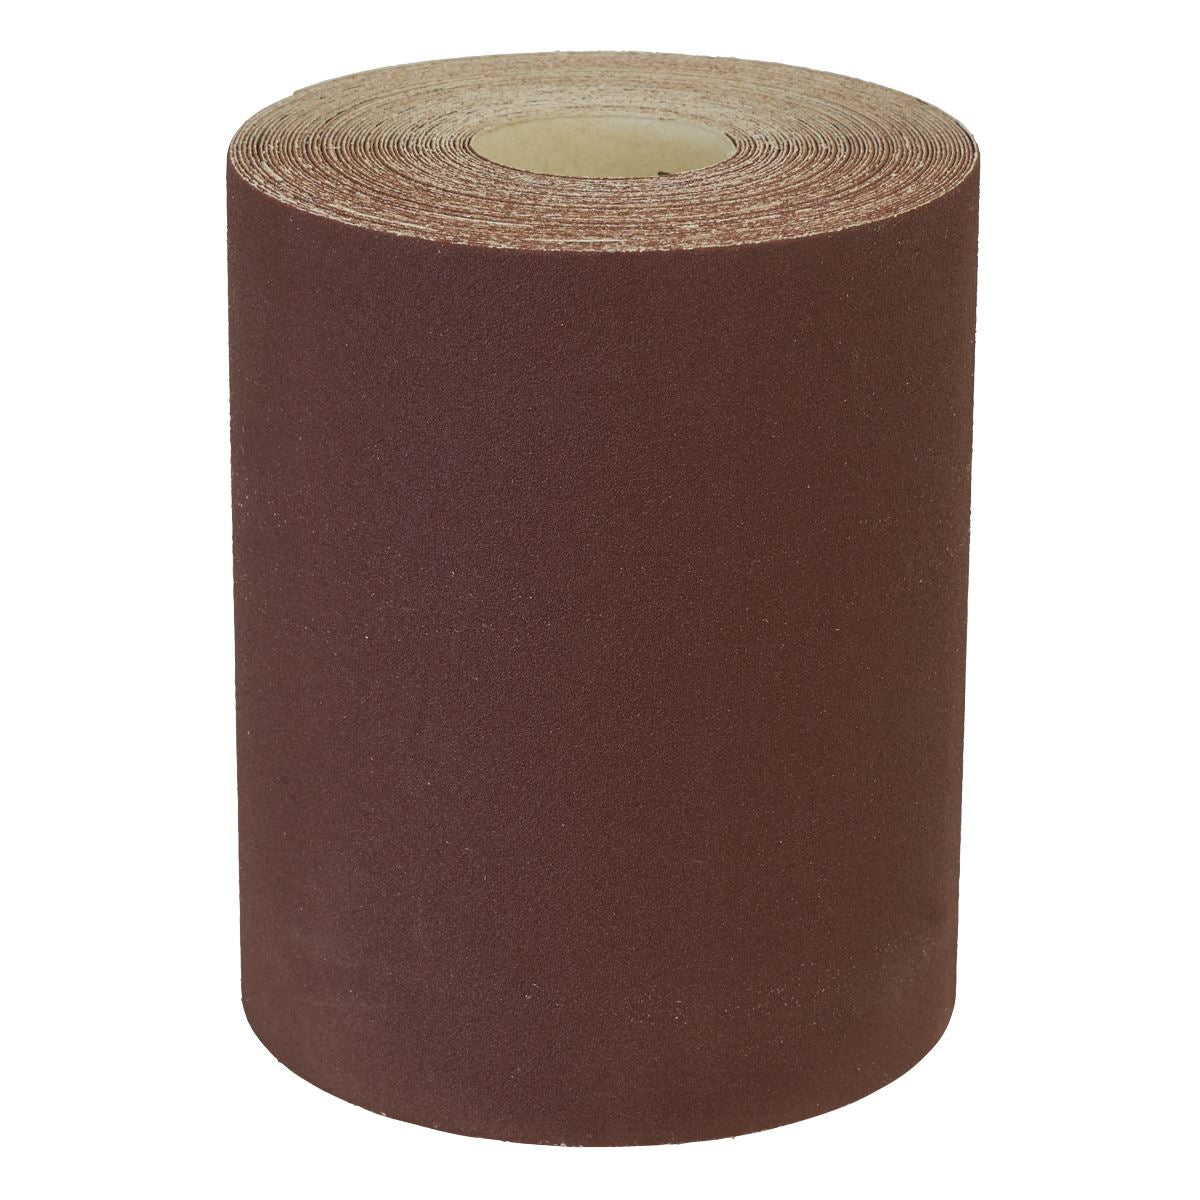 Worksafe by Sealey Production Sanding Roll 115mm x 10m - Extra-Fine 180Grit